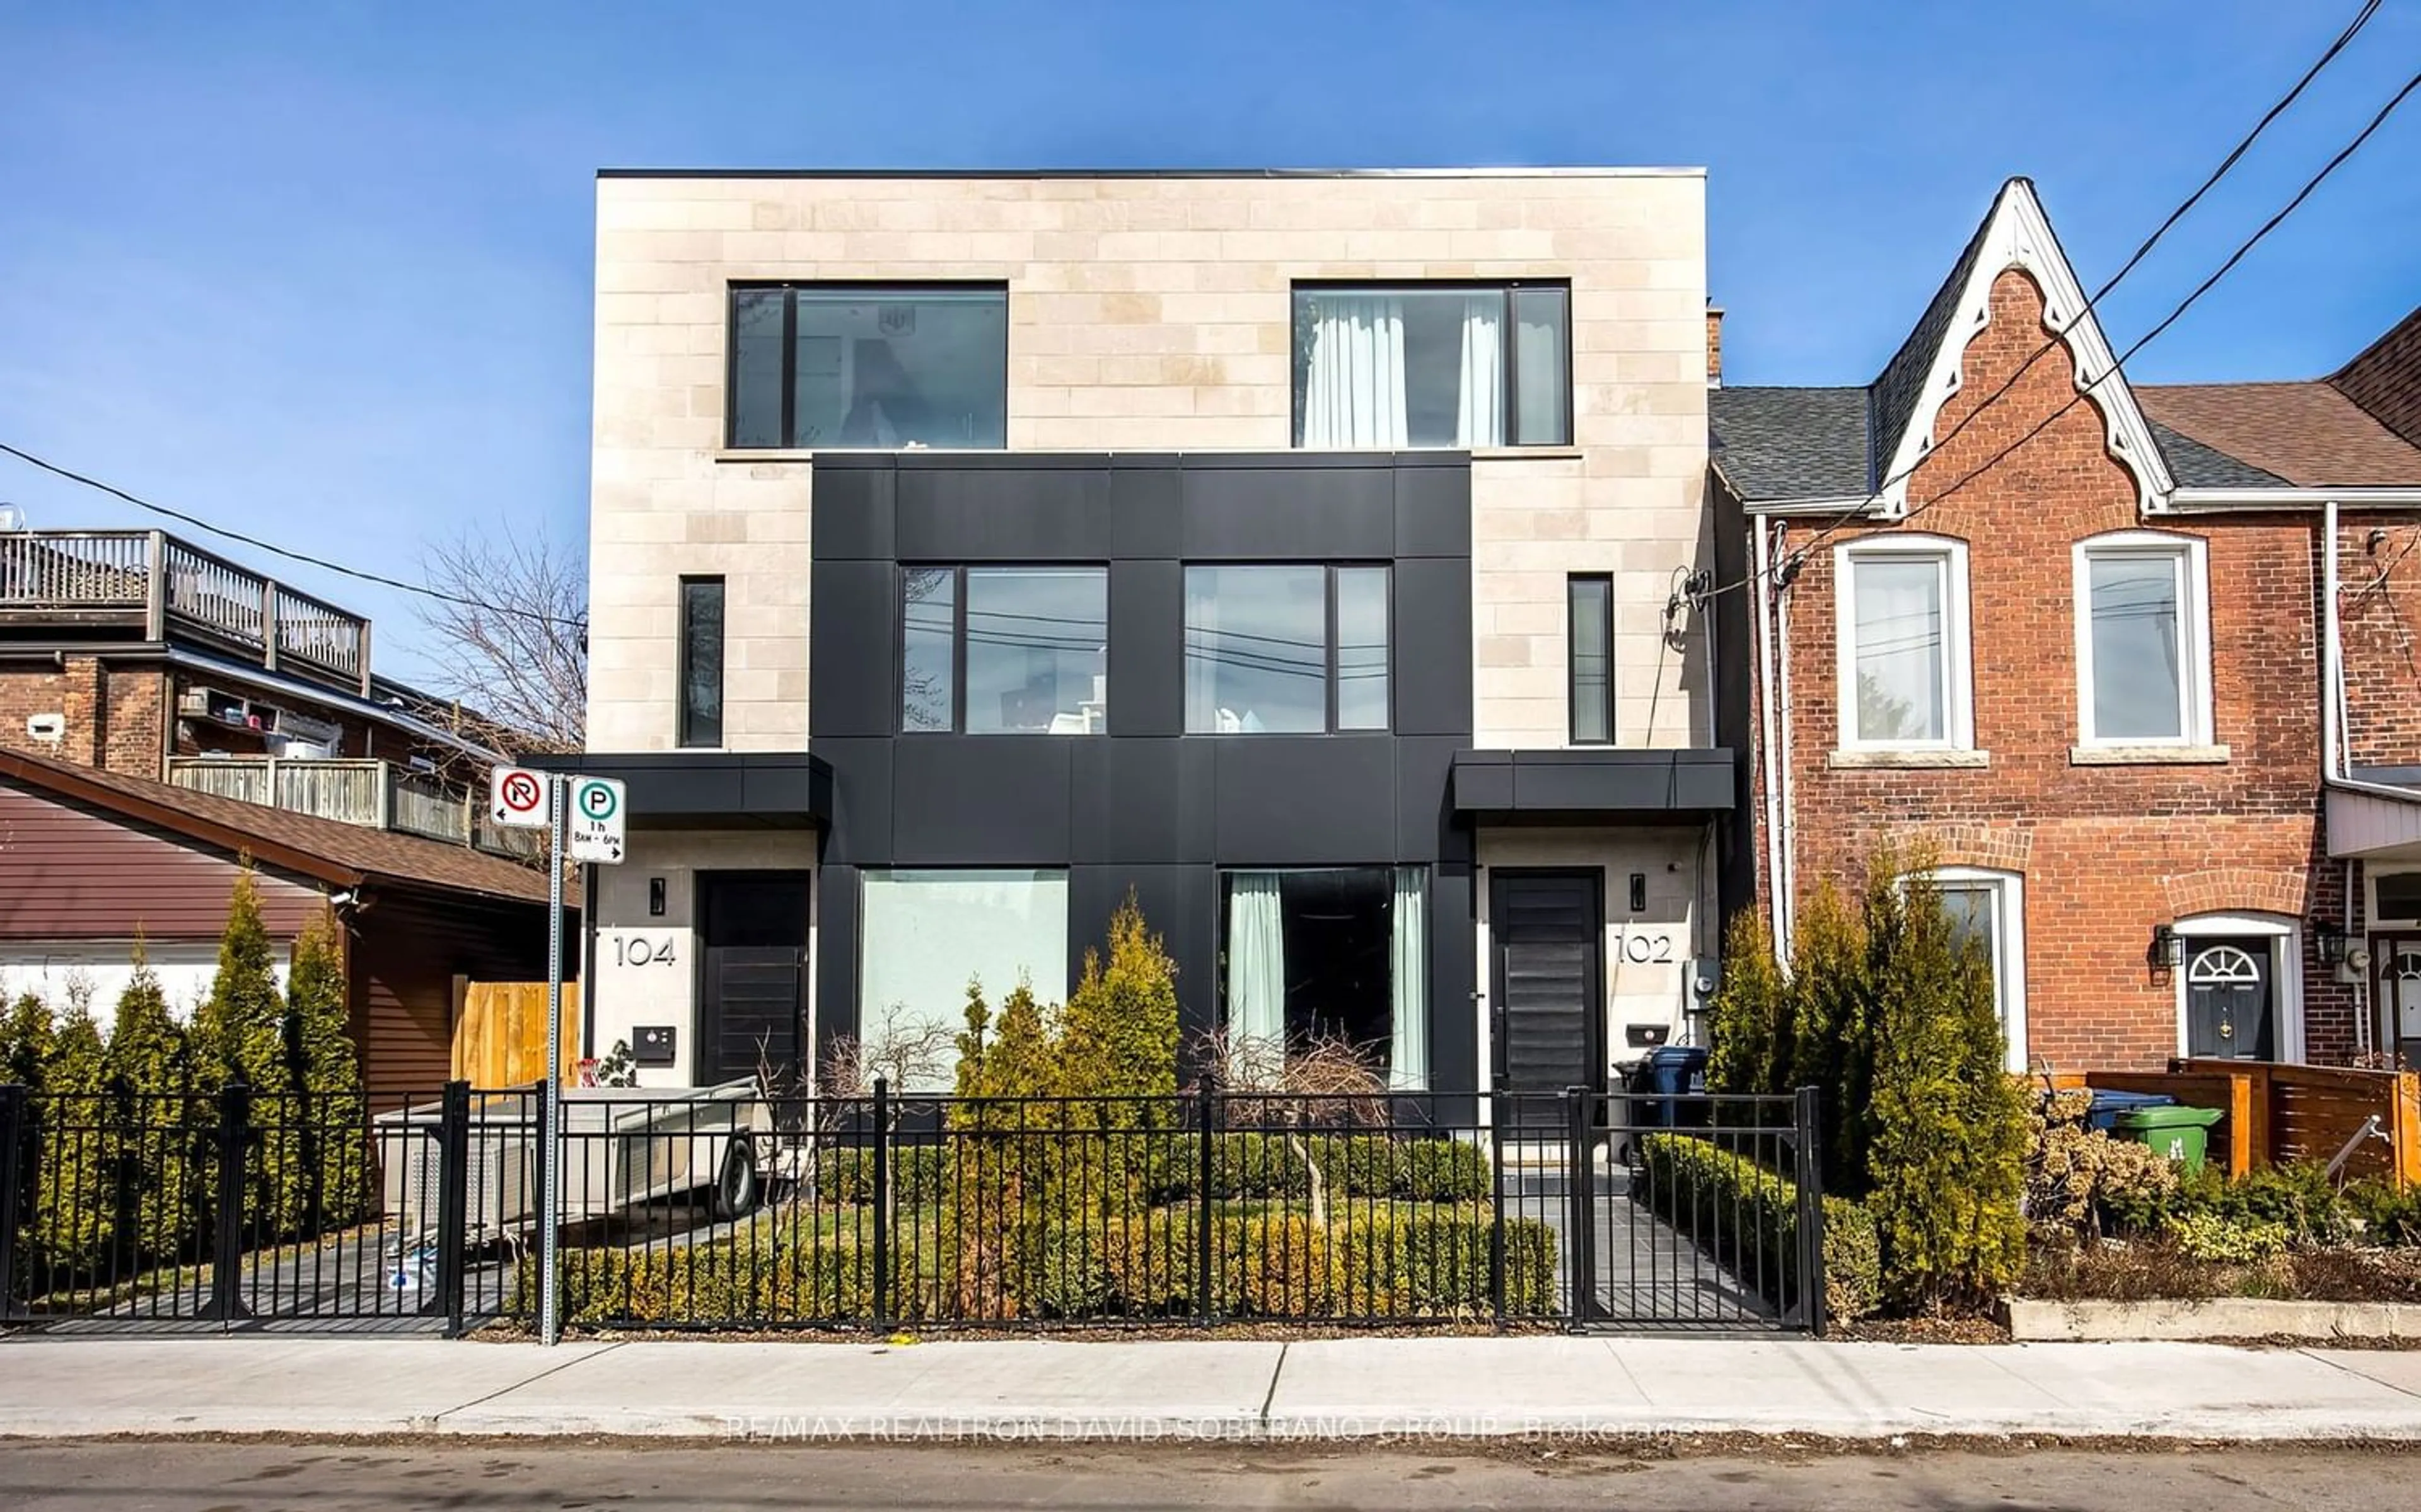 Home with brick exterior material for 102 Ulster St, Toronto Ontario M5S 1G1